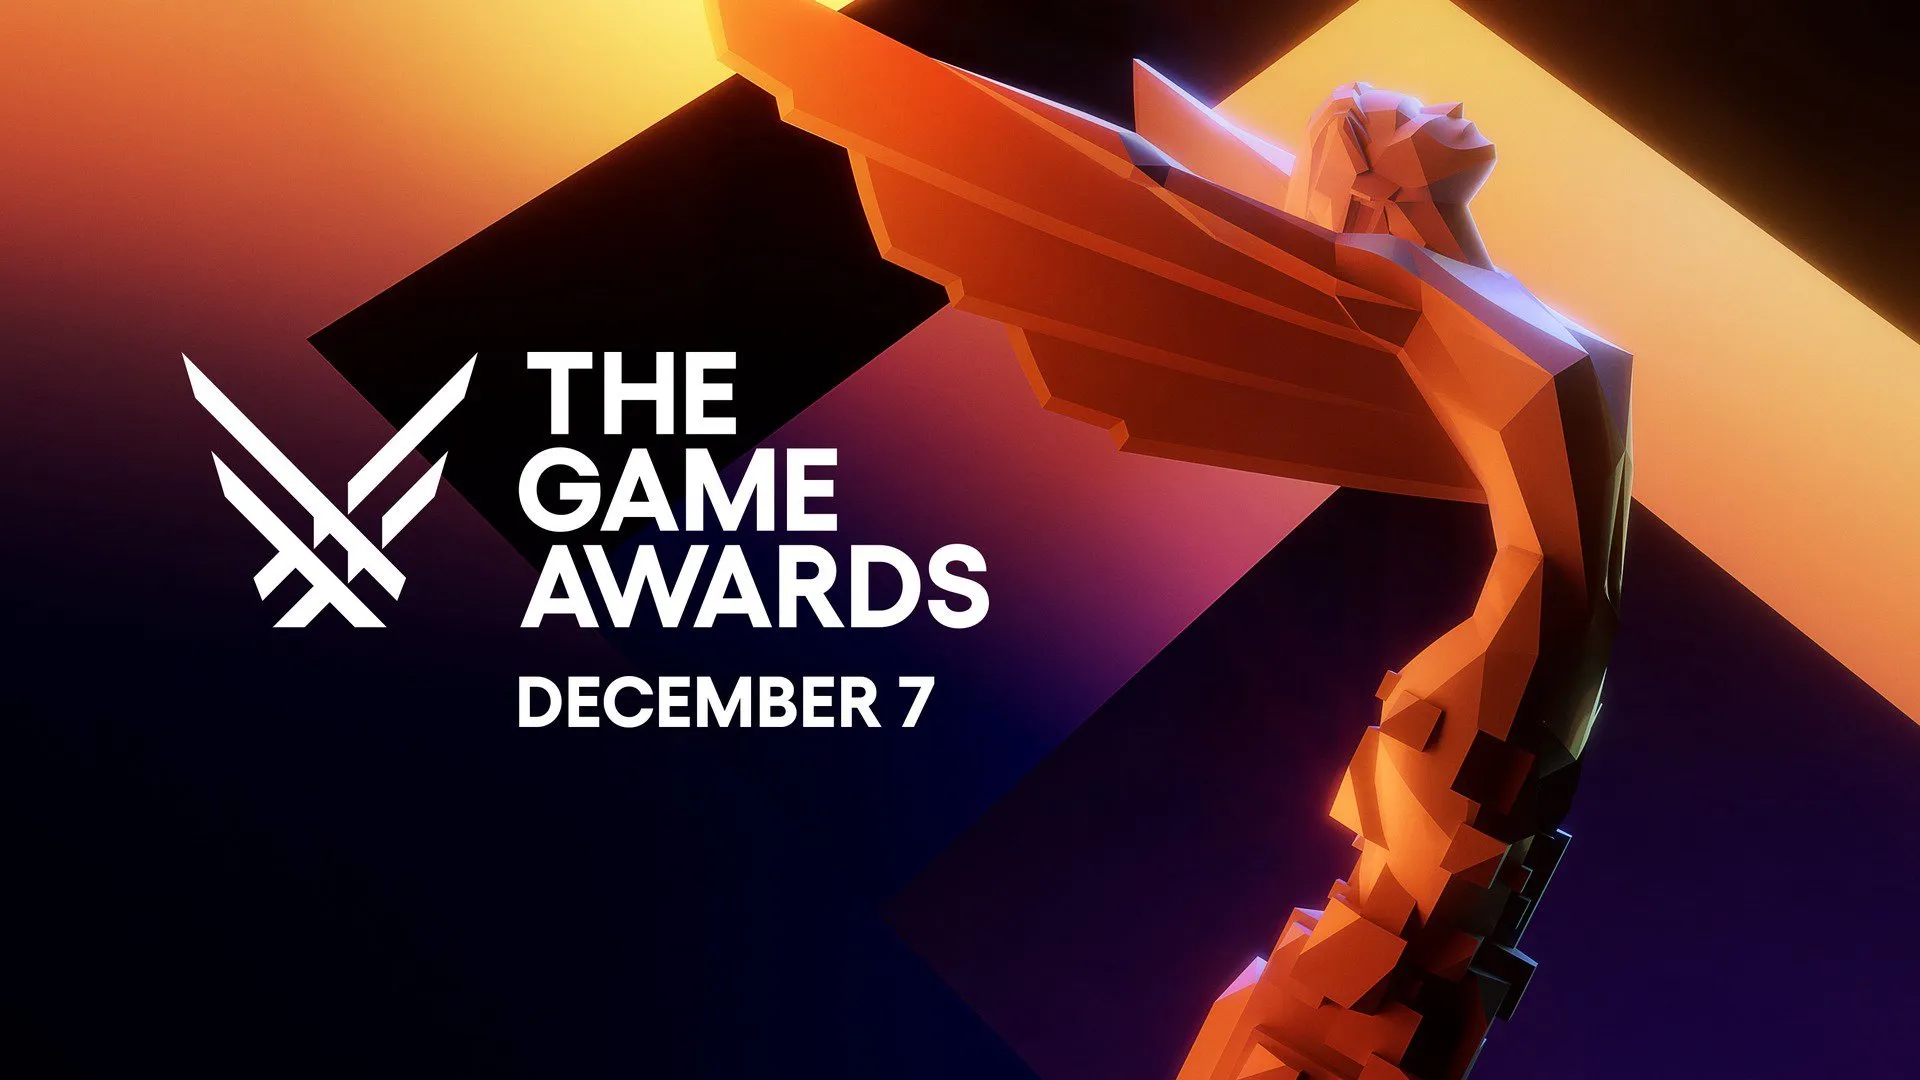 The Winners of 2023 - Mobile Games Awards